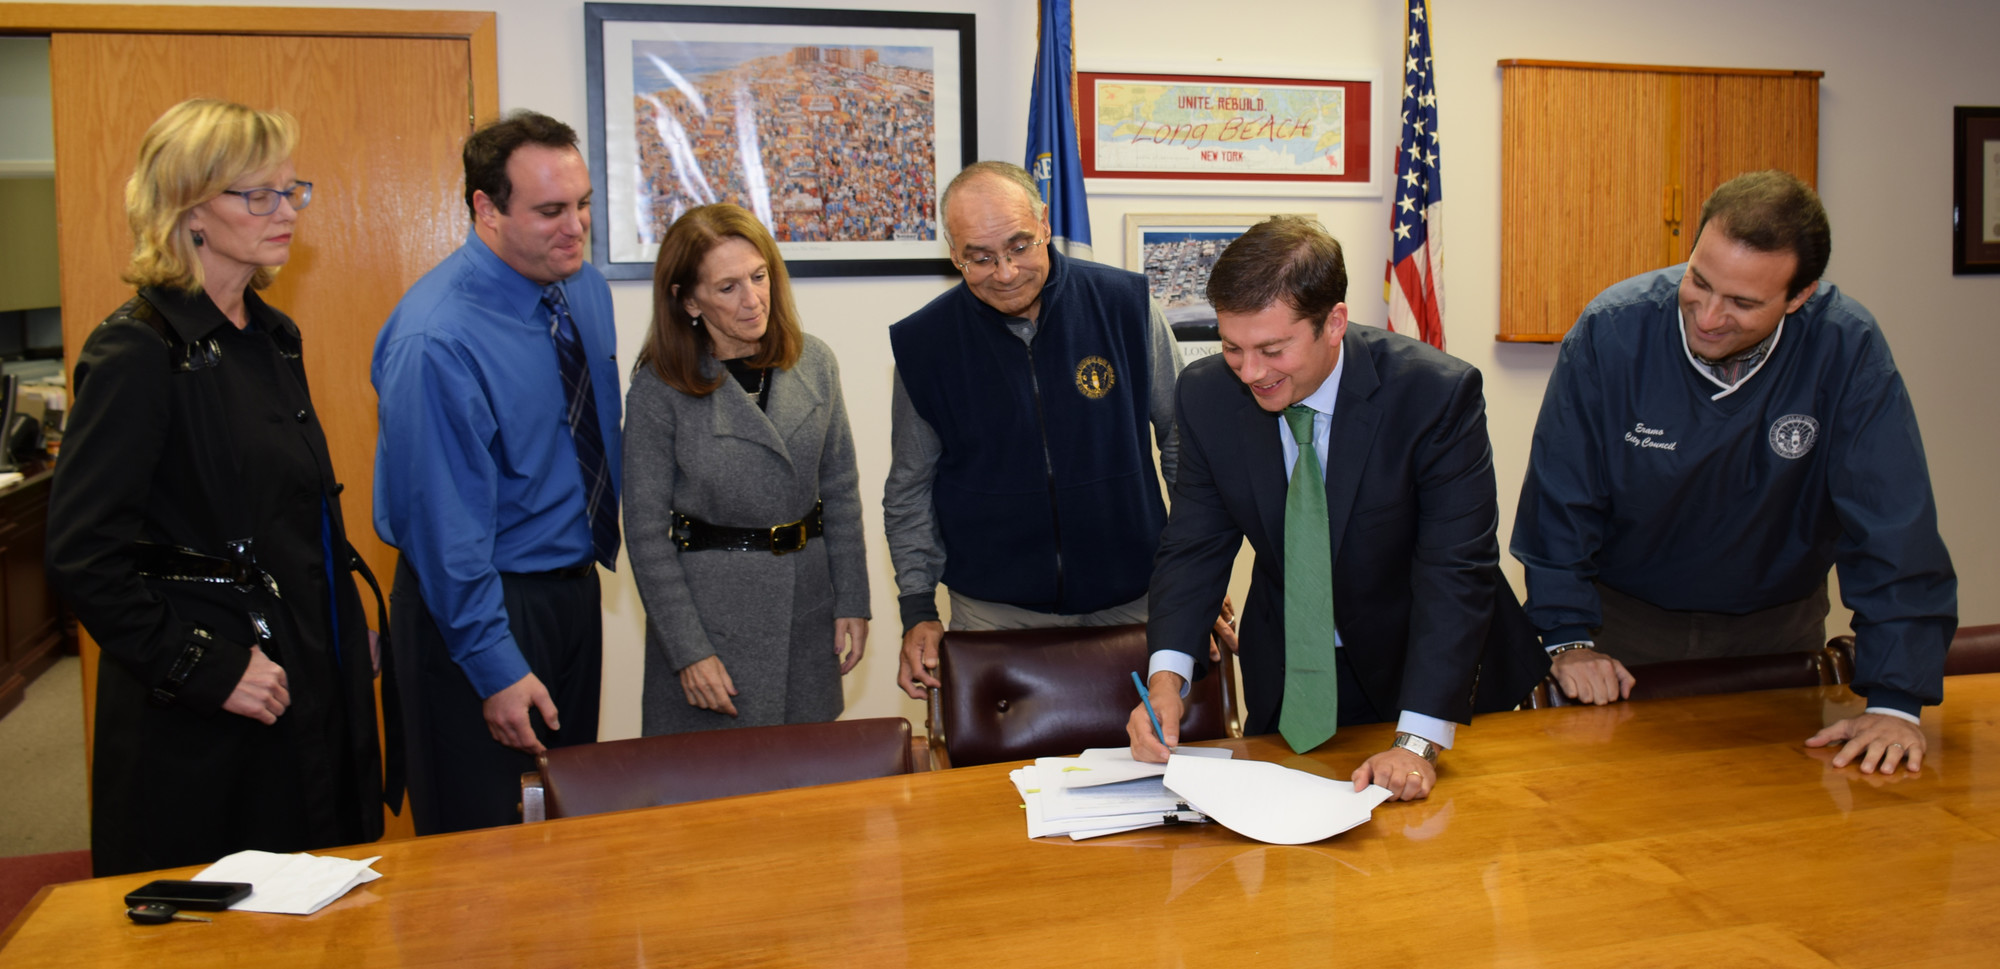 City Council members Eileen Goggin, left, Scott Mandel, Fran Adelson, Len Torres, City Manager Jack Schnirman, and Councilman Anthony Eramo look over an agreement with the state that allows the Army Corps of Engineers to formally begin its coastal protection project.